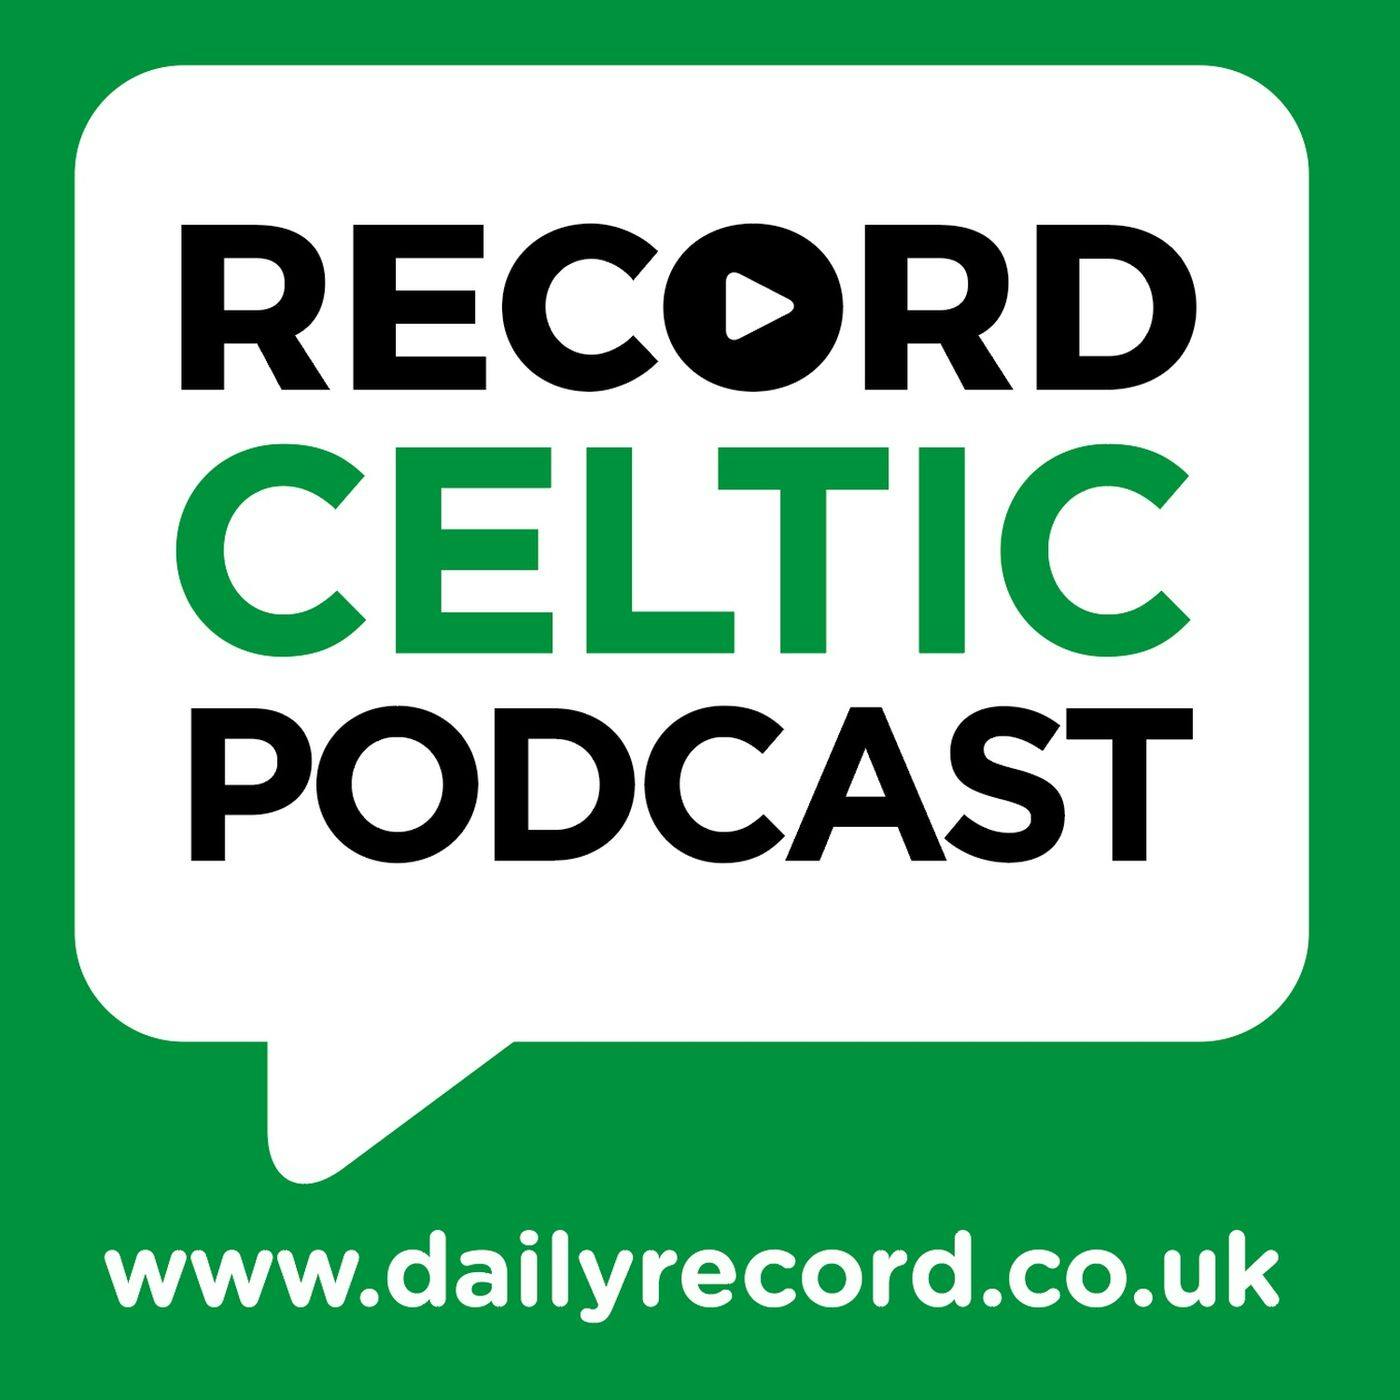 Why Celtic won the title this weekend | Timothy Weah’s welcome to the Premiership | How the Euro ’glass ceiling’ can still be shattered